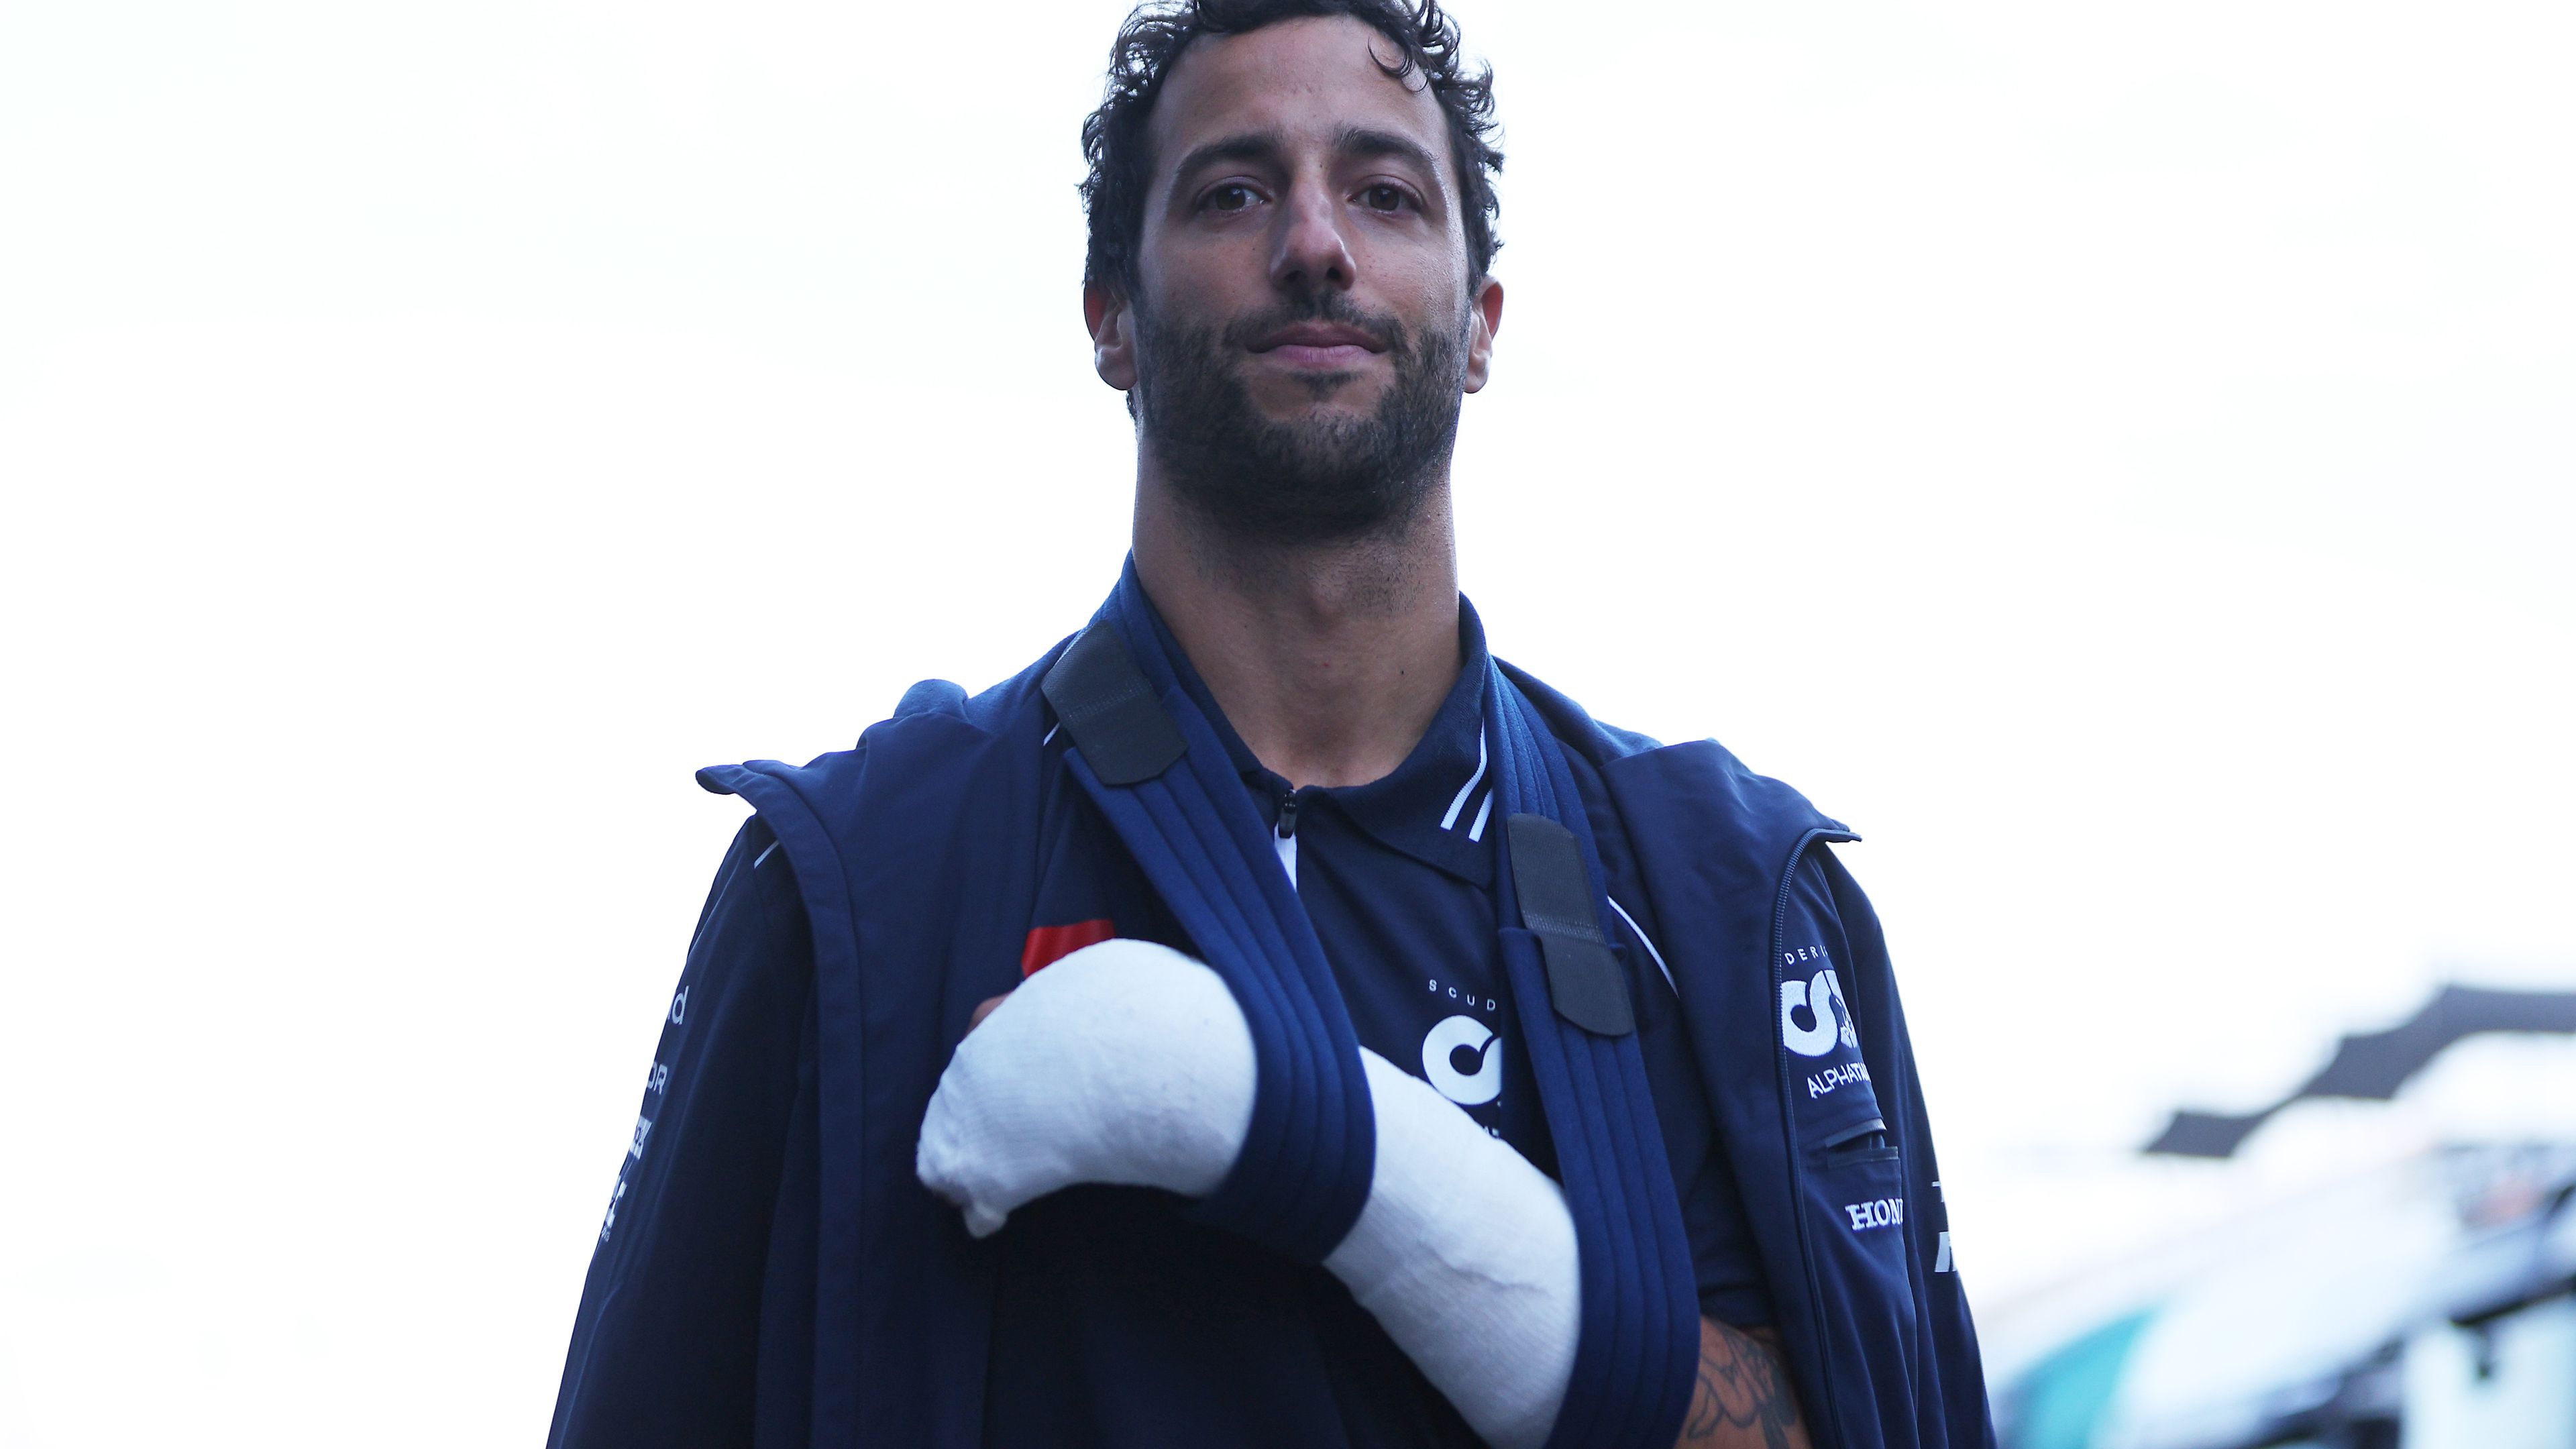 Daniel Ricciardo of Australia and Scuderia AlphaTauri wears a cast on his hand after crashing during practice which has ruled him out of competing in this weekends race ahead of the F1 Grand Prix of The Netherlands at Circuit Zandvoort on August 25, 2023 in Zandvoort, Netherlands. (Photo by Dean Mouhtaropoulos/Getty Images)